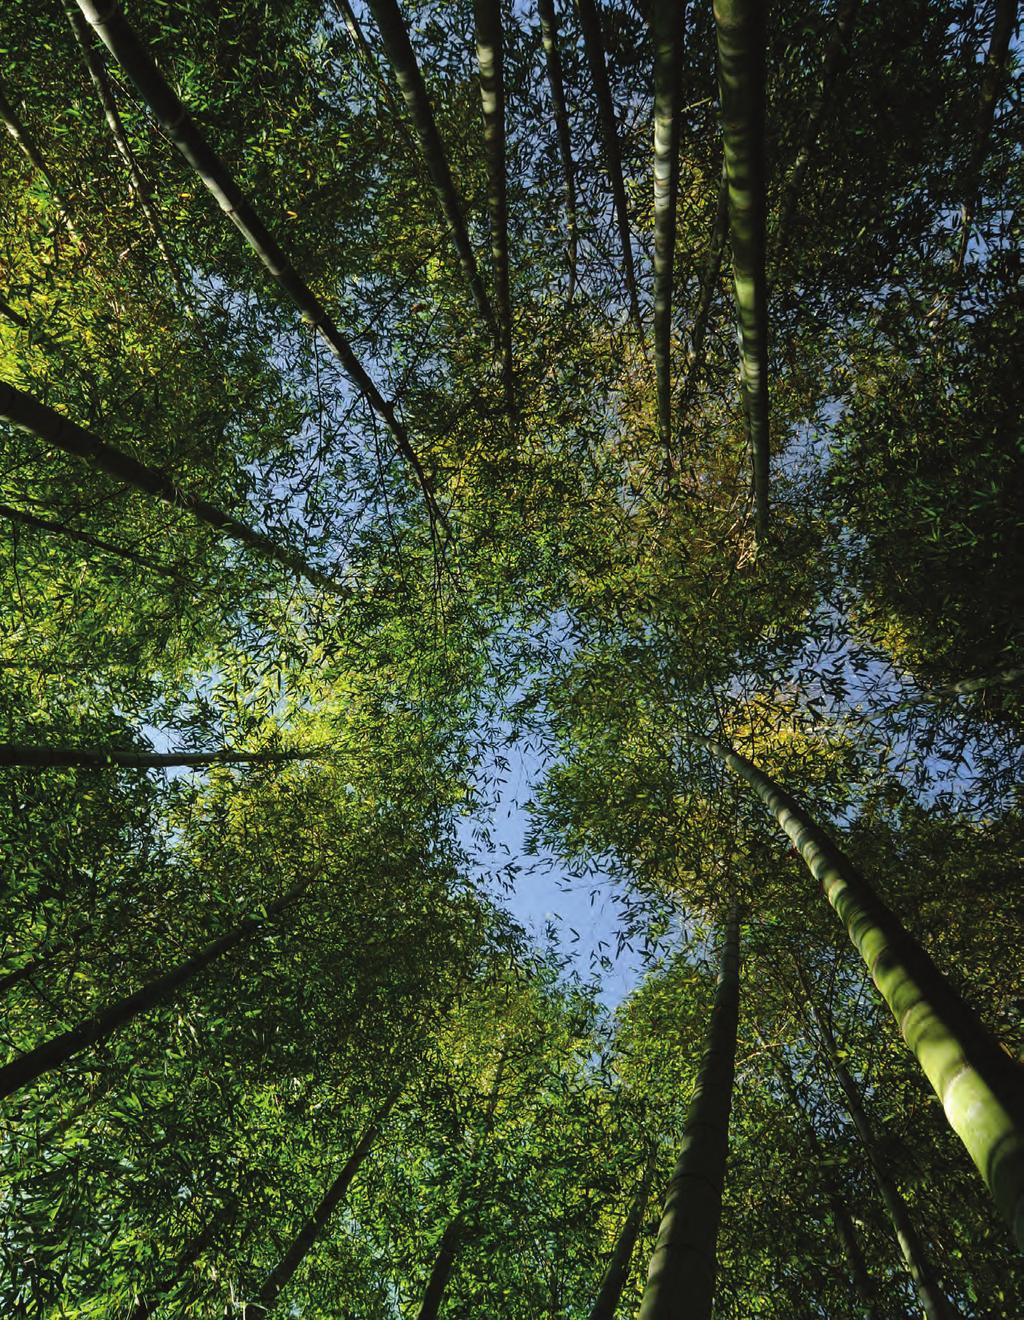 Sustainable Investing at OMERS OMERS believes that the consideration of environmental, social and governance (ESG) factors is consistent with its objective to meet long-term payment obligations to